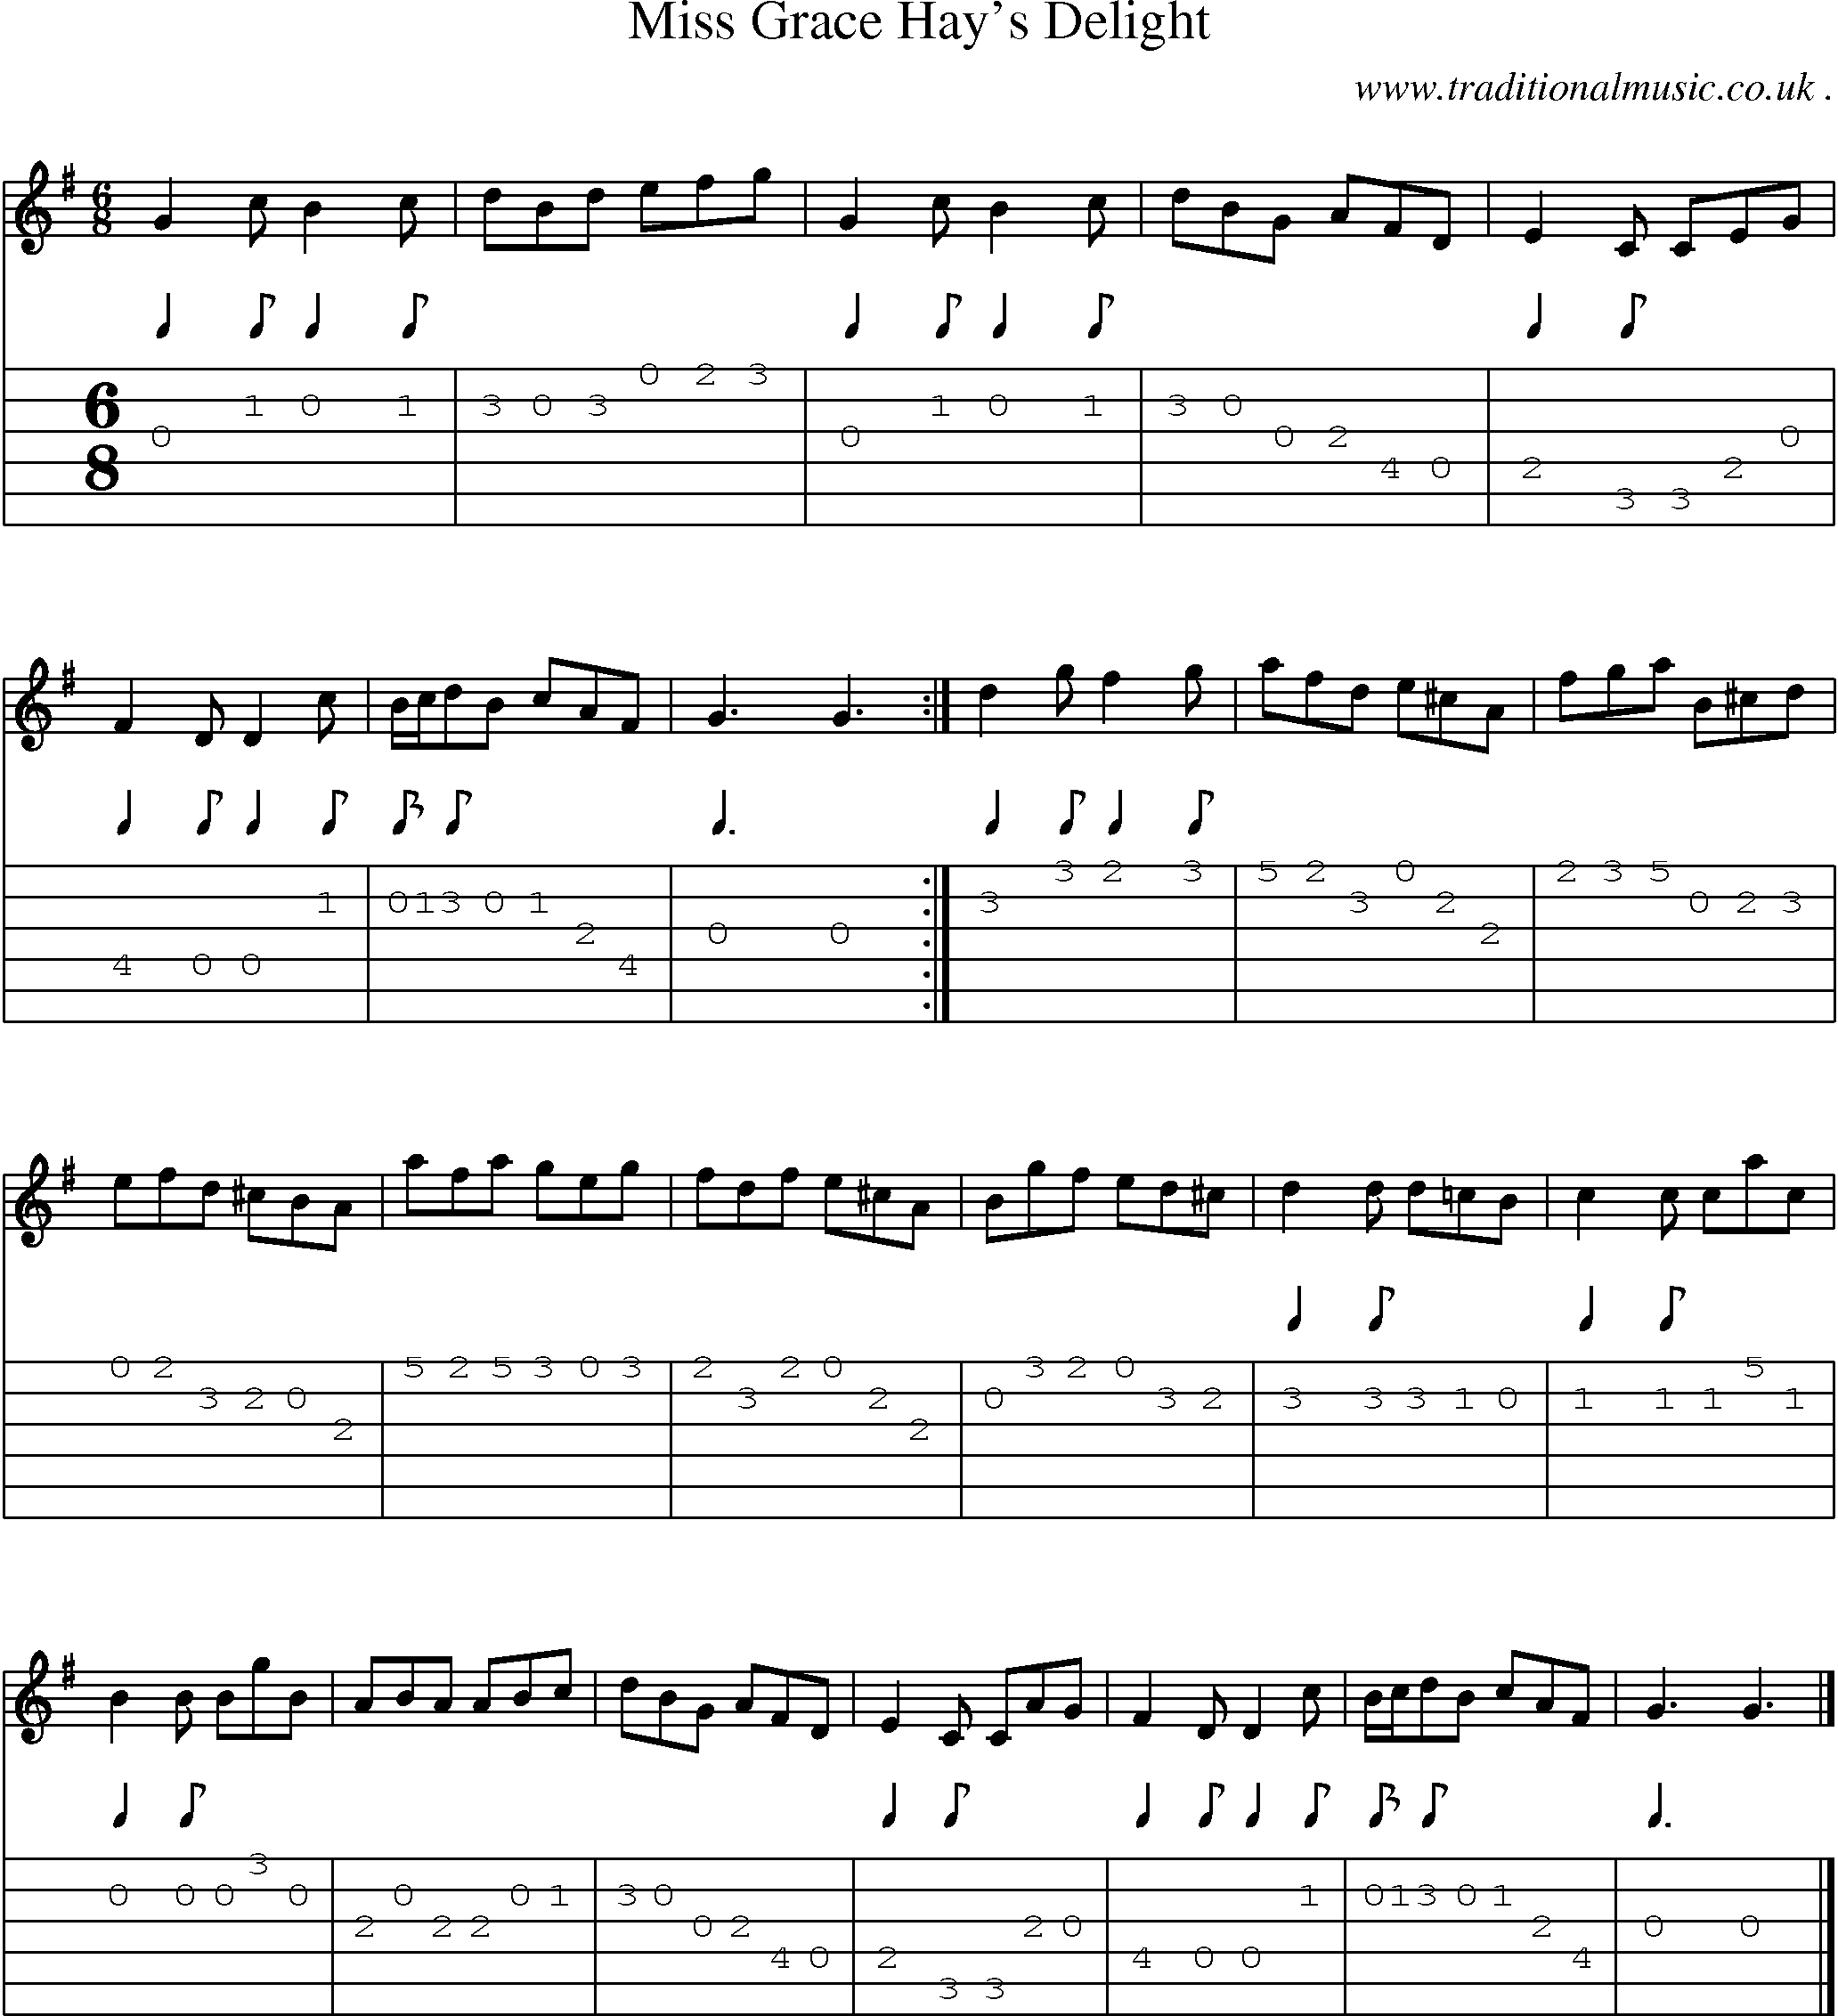 Sheet-music  score, Chords and Guitar Tabs for Miss Grace Hays Delight